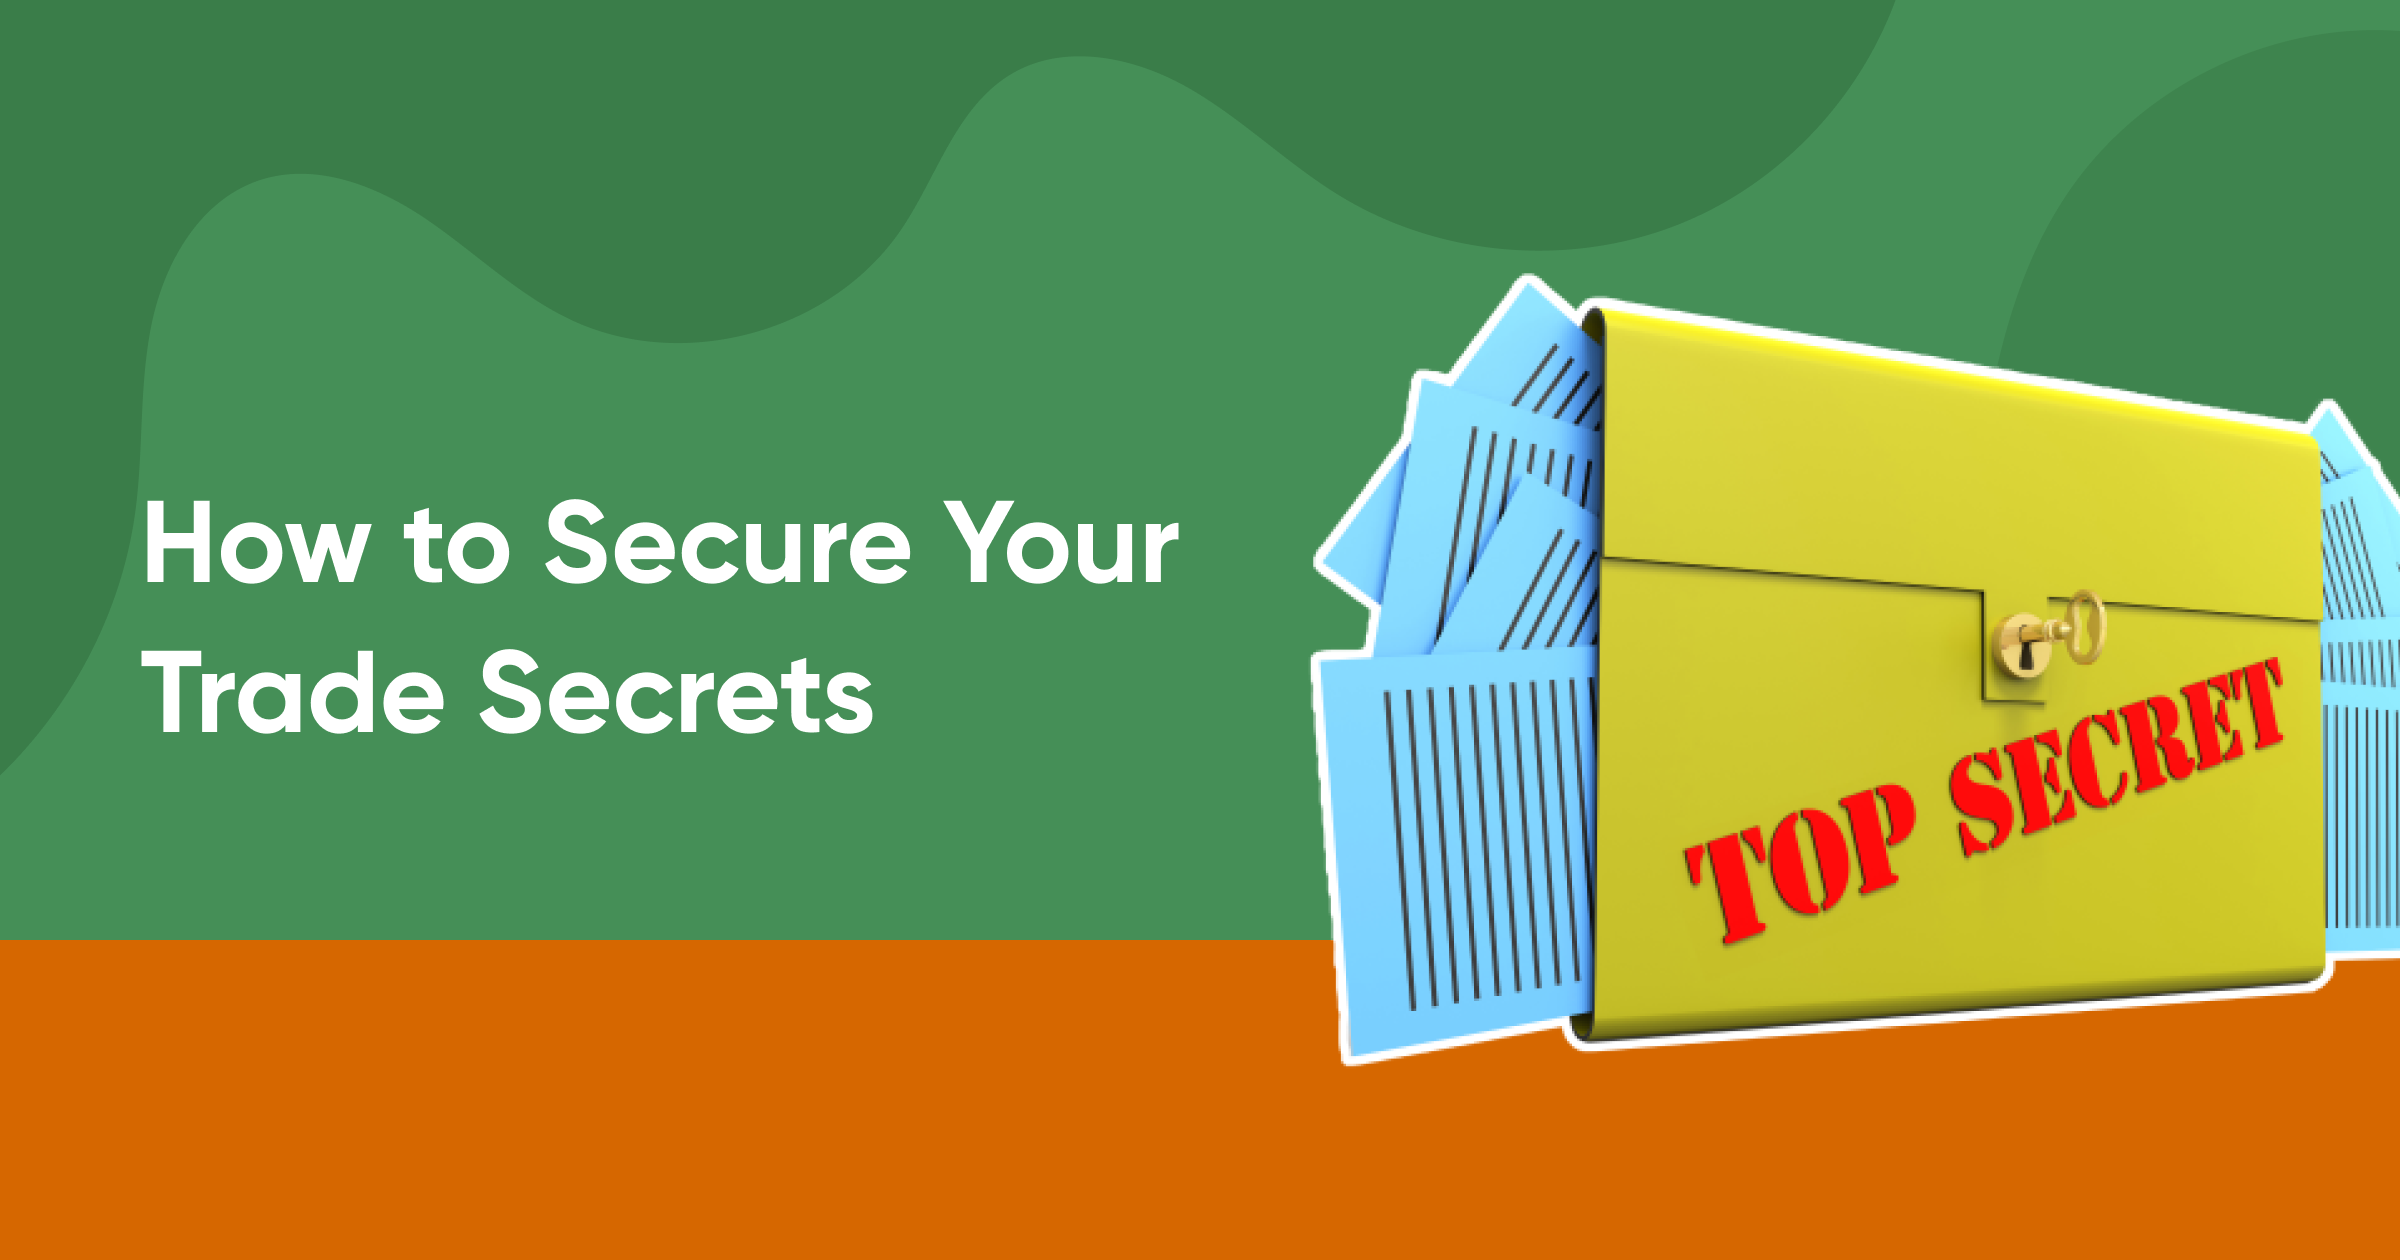 How to secure your trade secrets